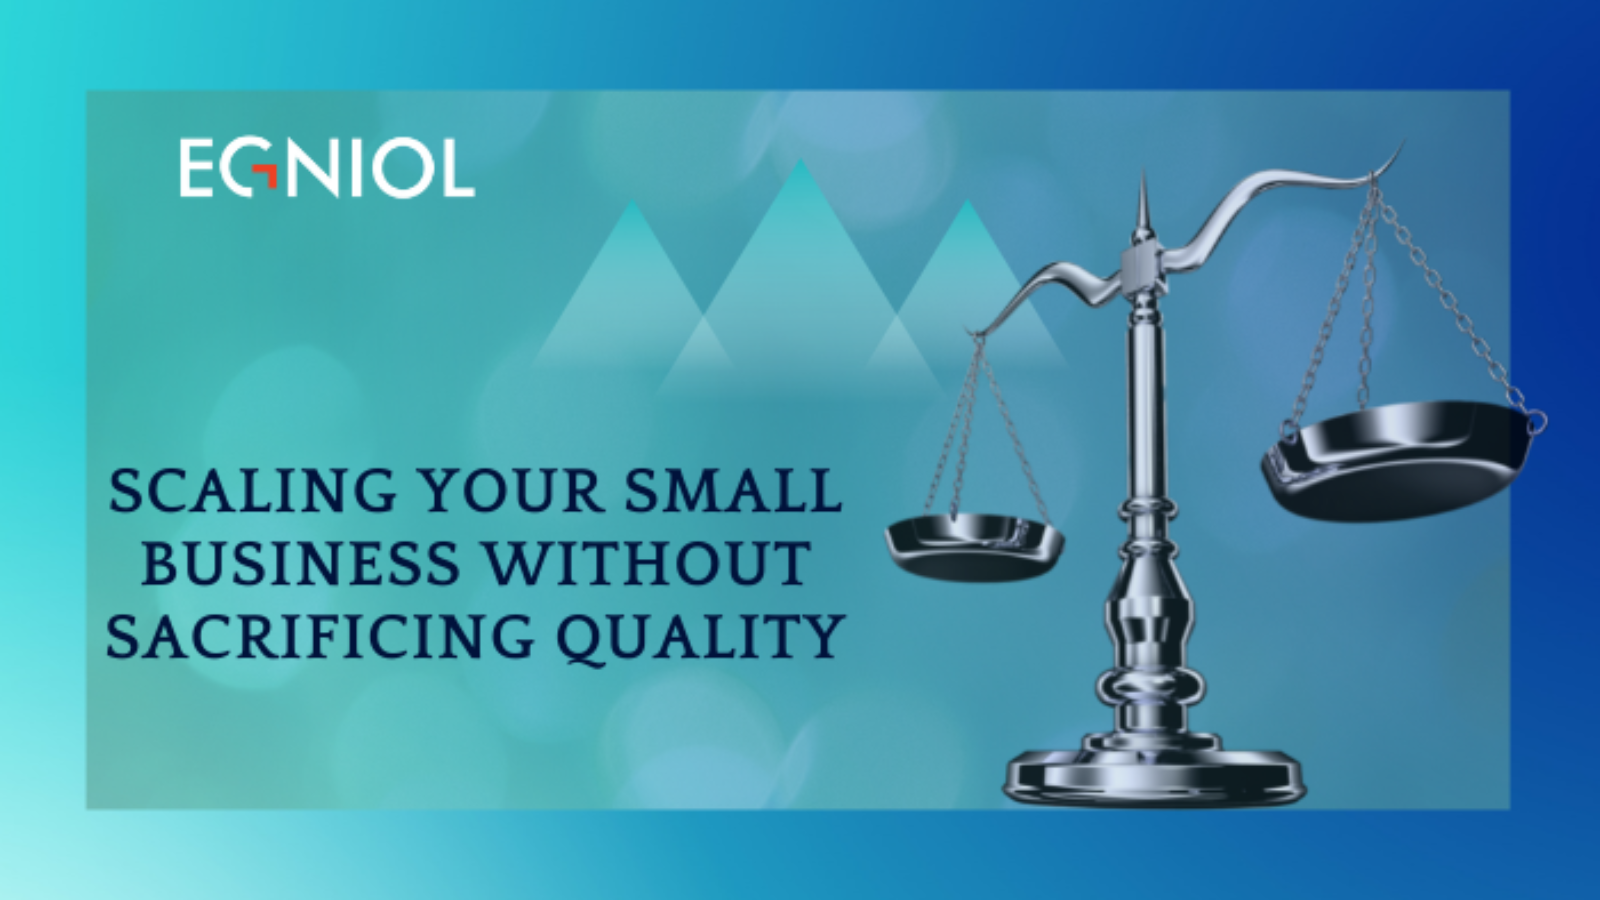 Scaling Your Small Business Without Sacrificing Quality - By Egniol